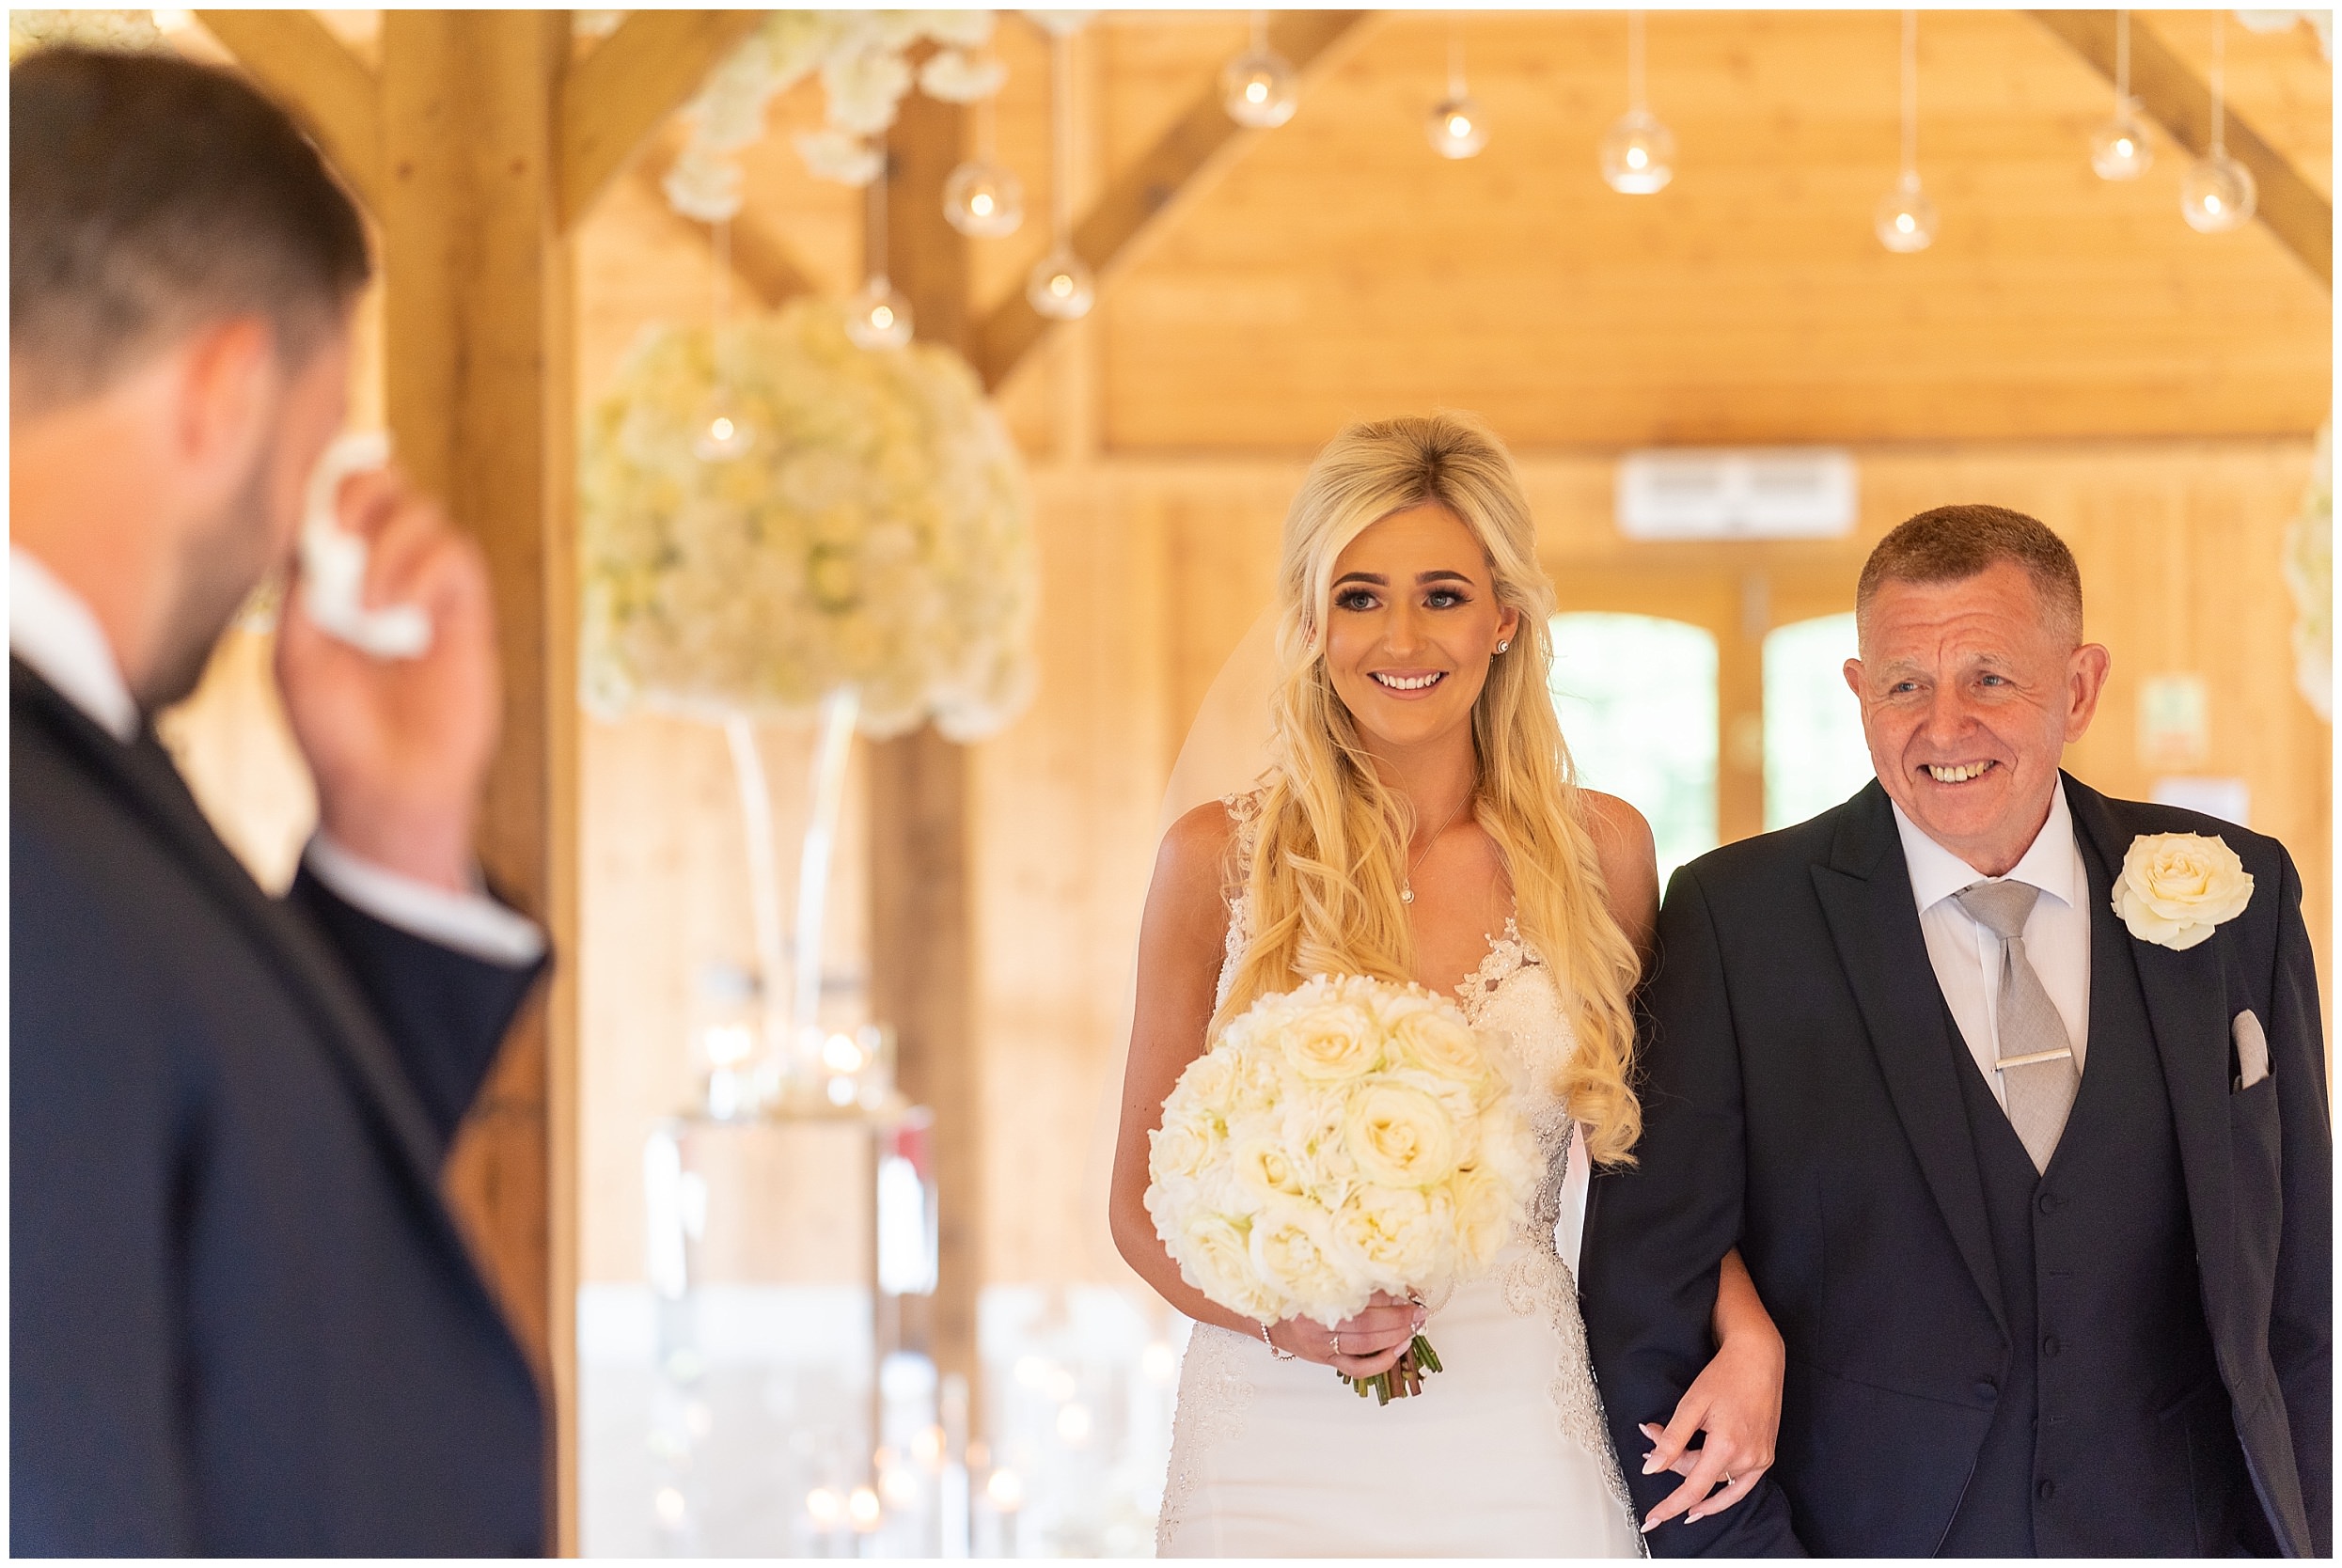 Bride and her father walking down the aisle at Merrydale Manor